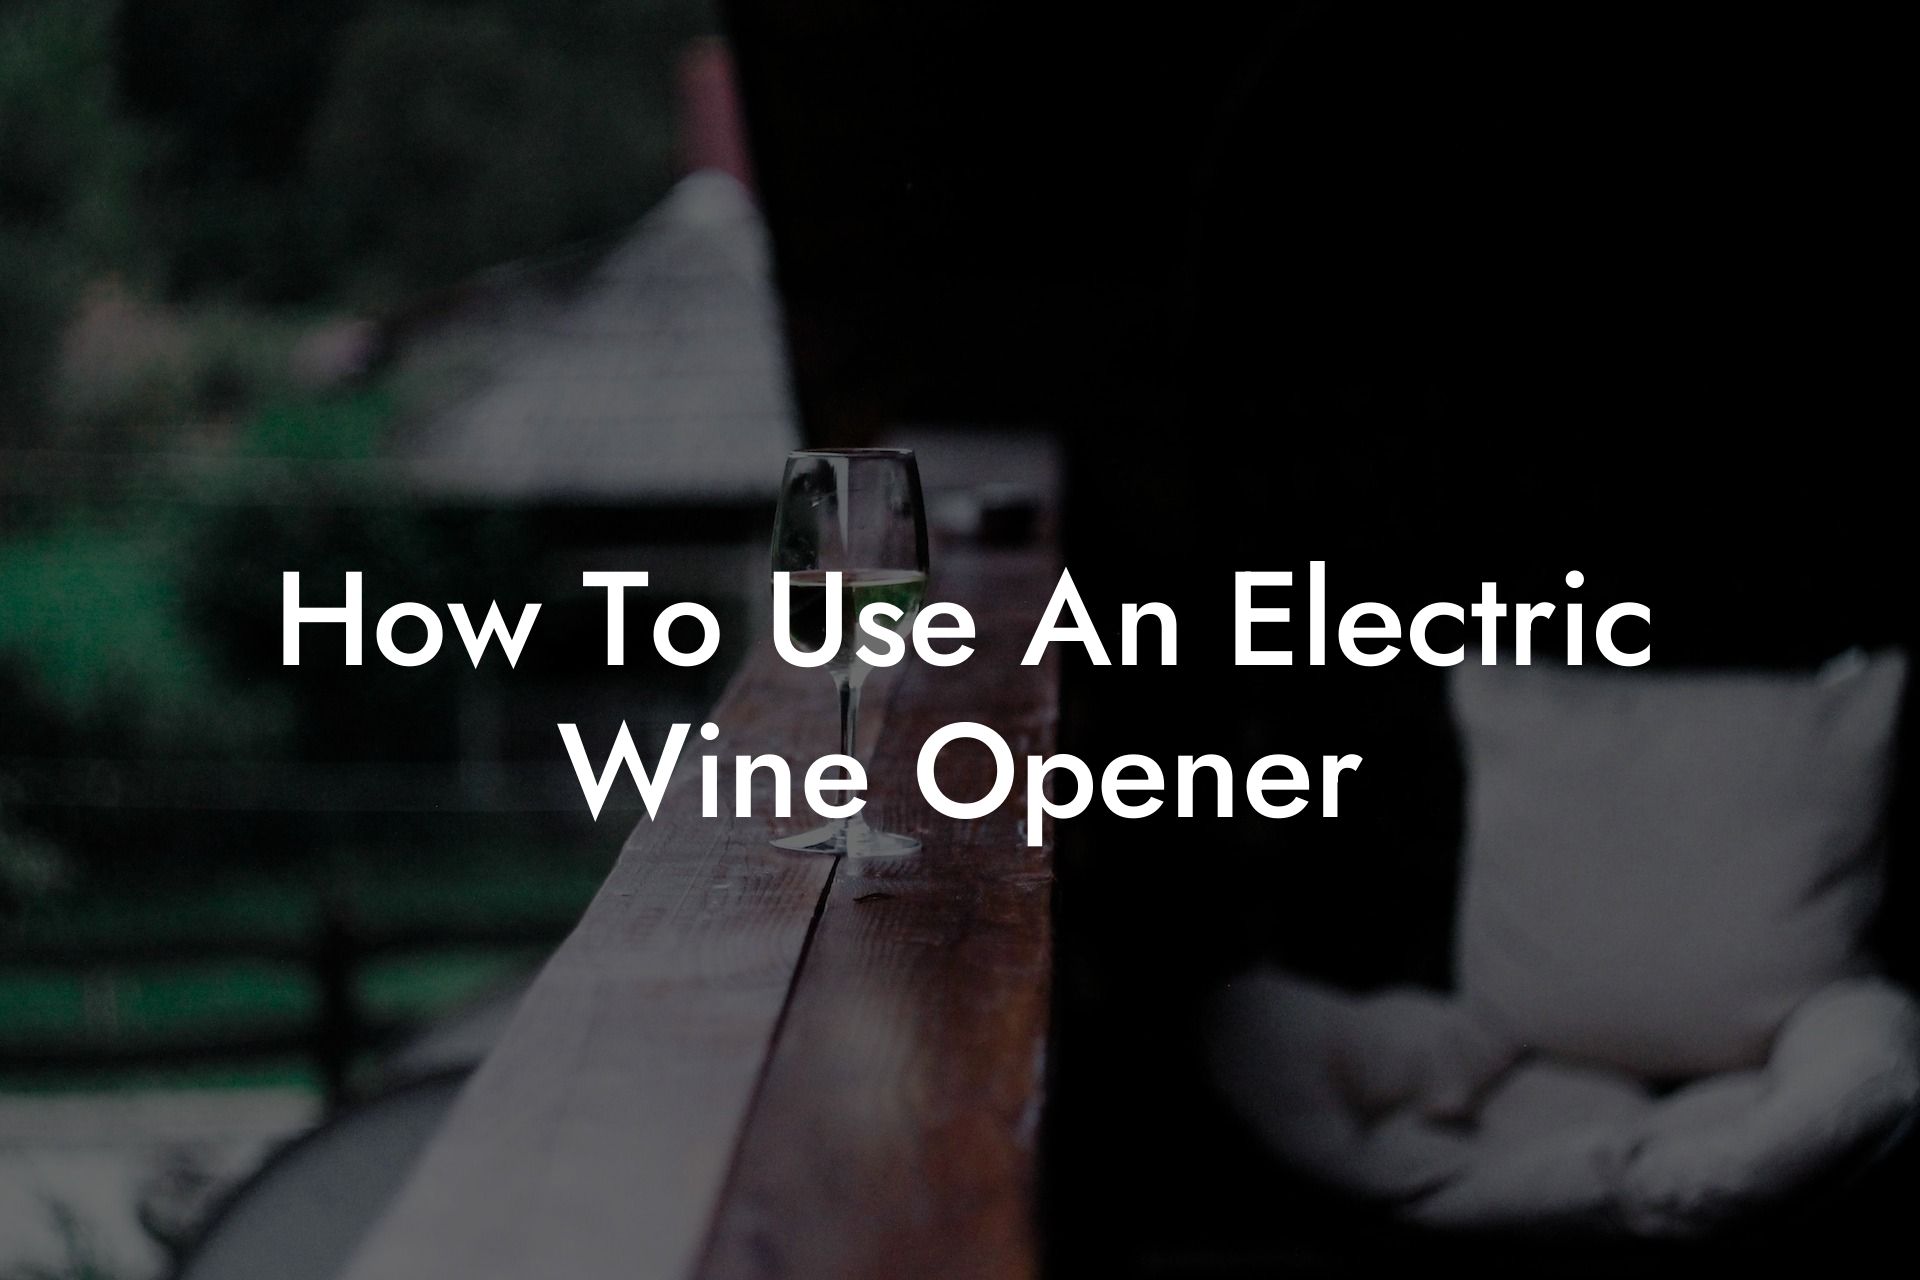 How To Use An Electric Wine Opener